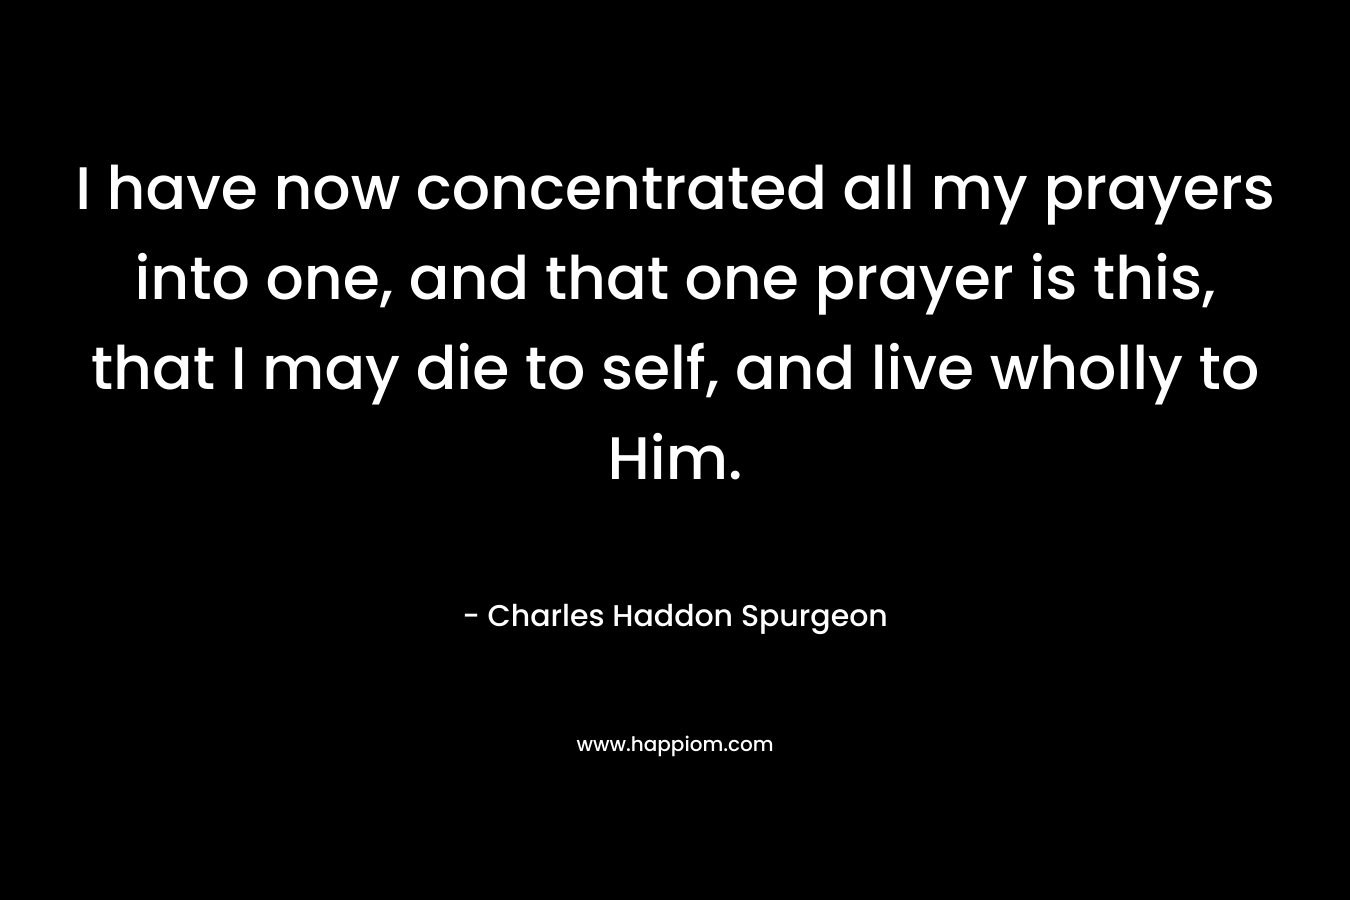 I have now concentrated all my prayers into one, and that one prayer is this, that I may die to self, and live wholly to Him. – Charles Haddon Spurgeon